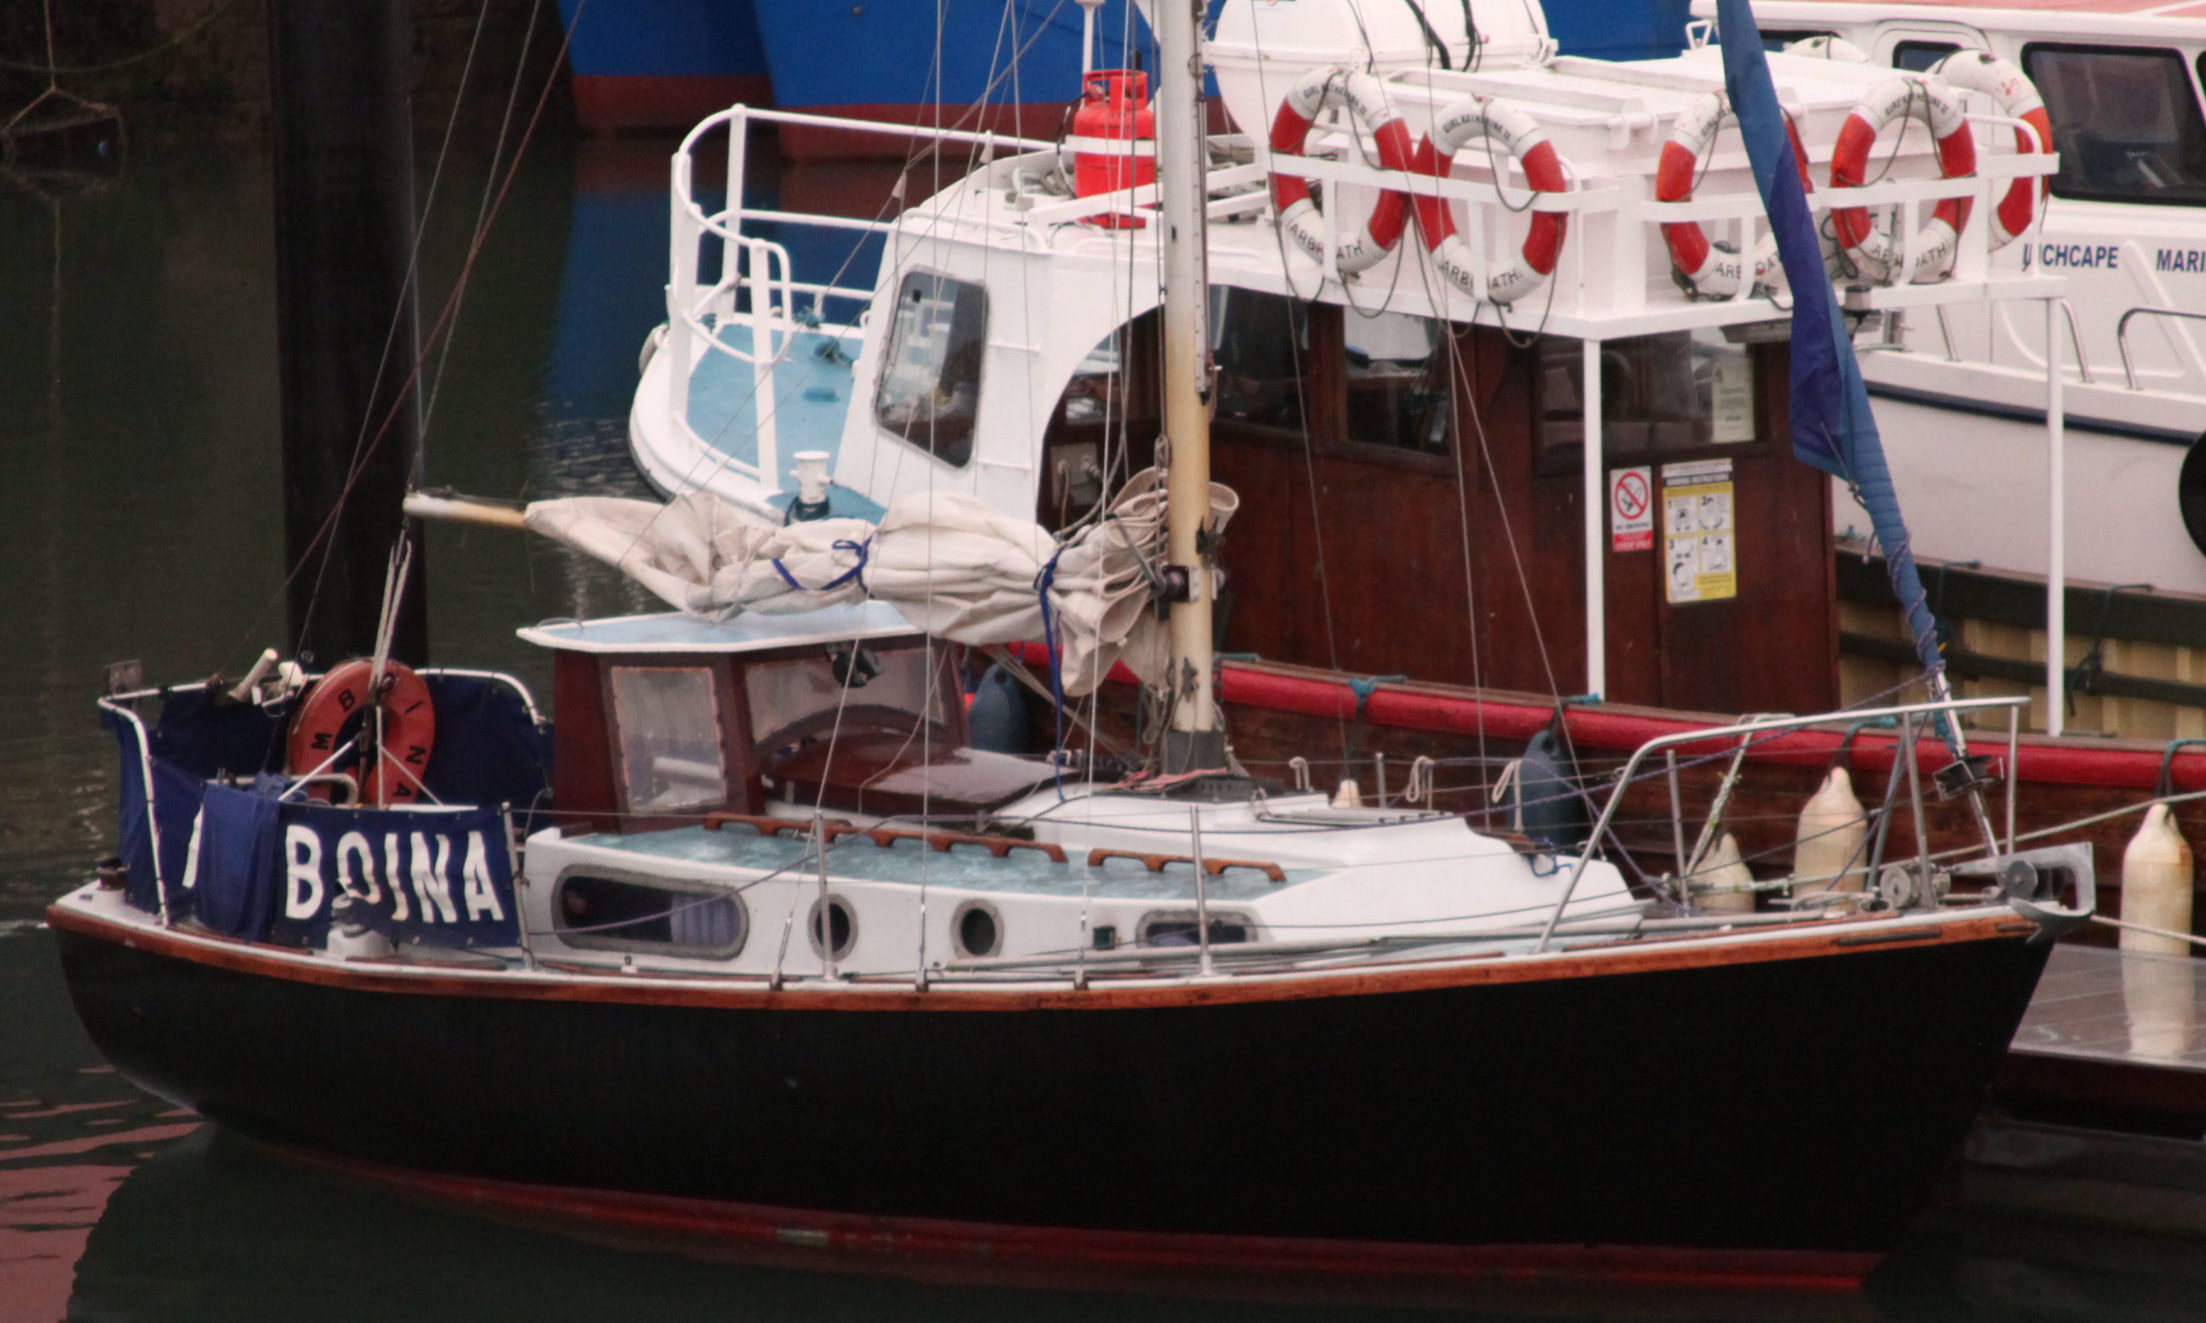 RNLI had to rescue the yacht from near the coast at Arbroath.